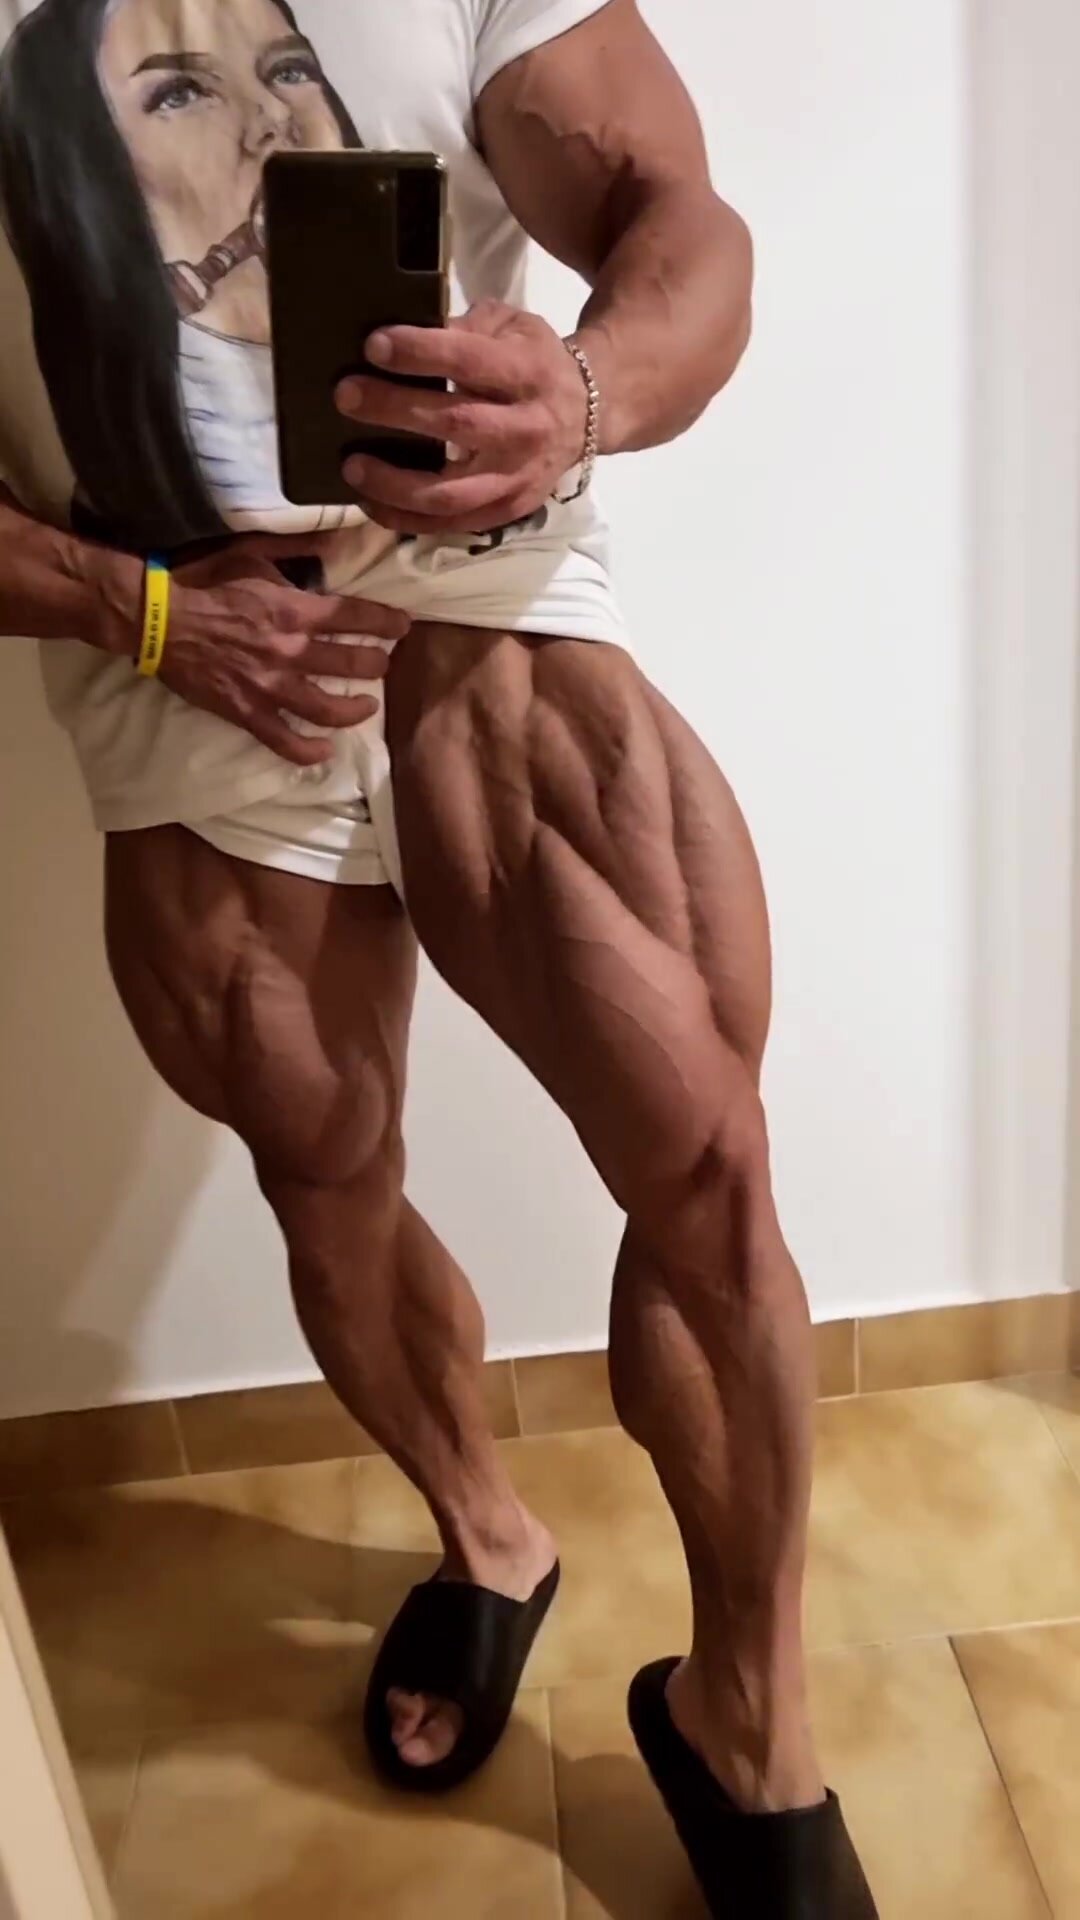 Giant killer Quads Wdition